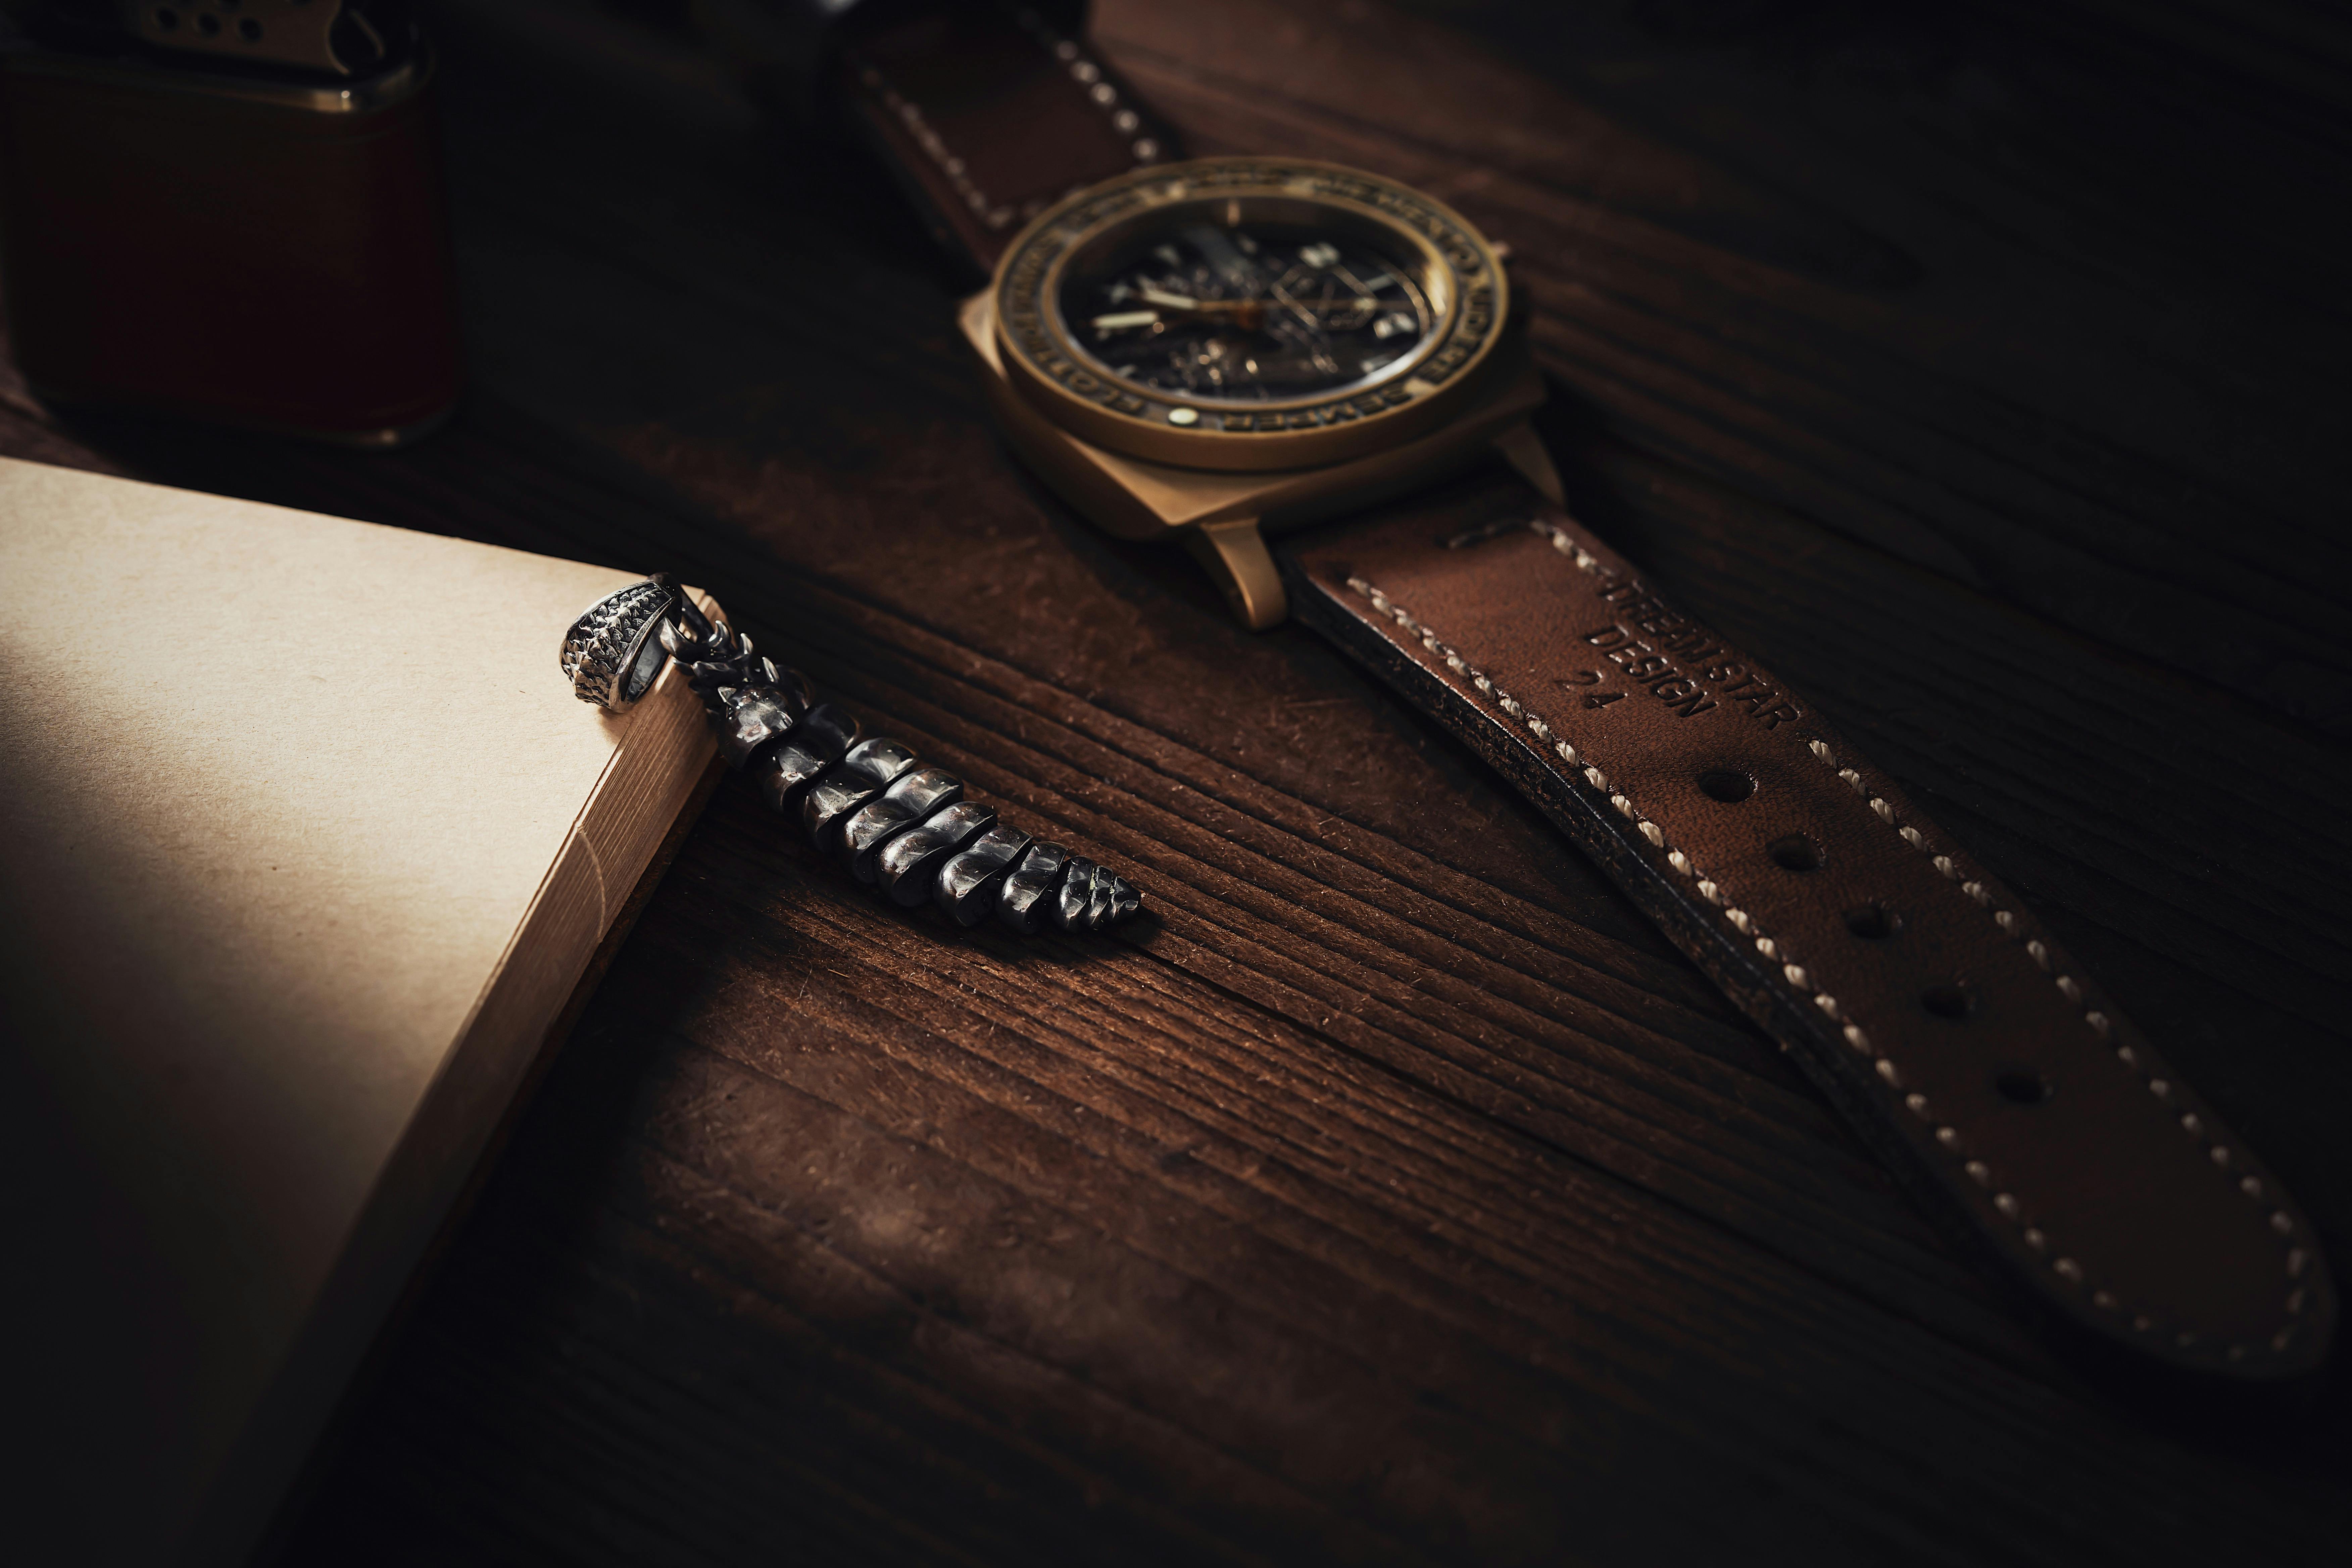 How Often Should I Service My Luxury Watch, And What Does A Typical Service Entail?